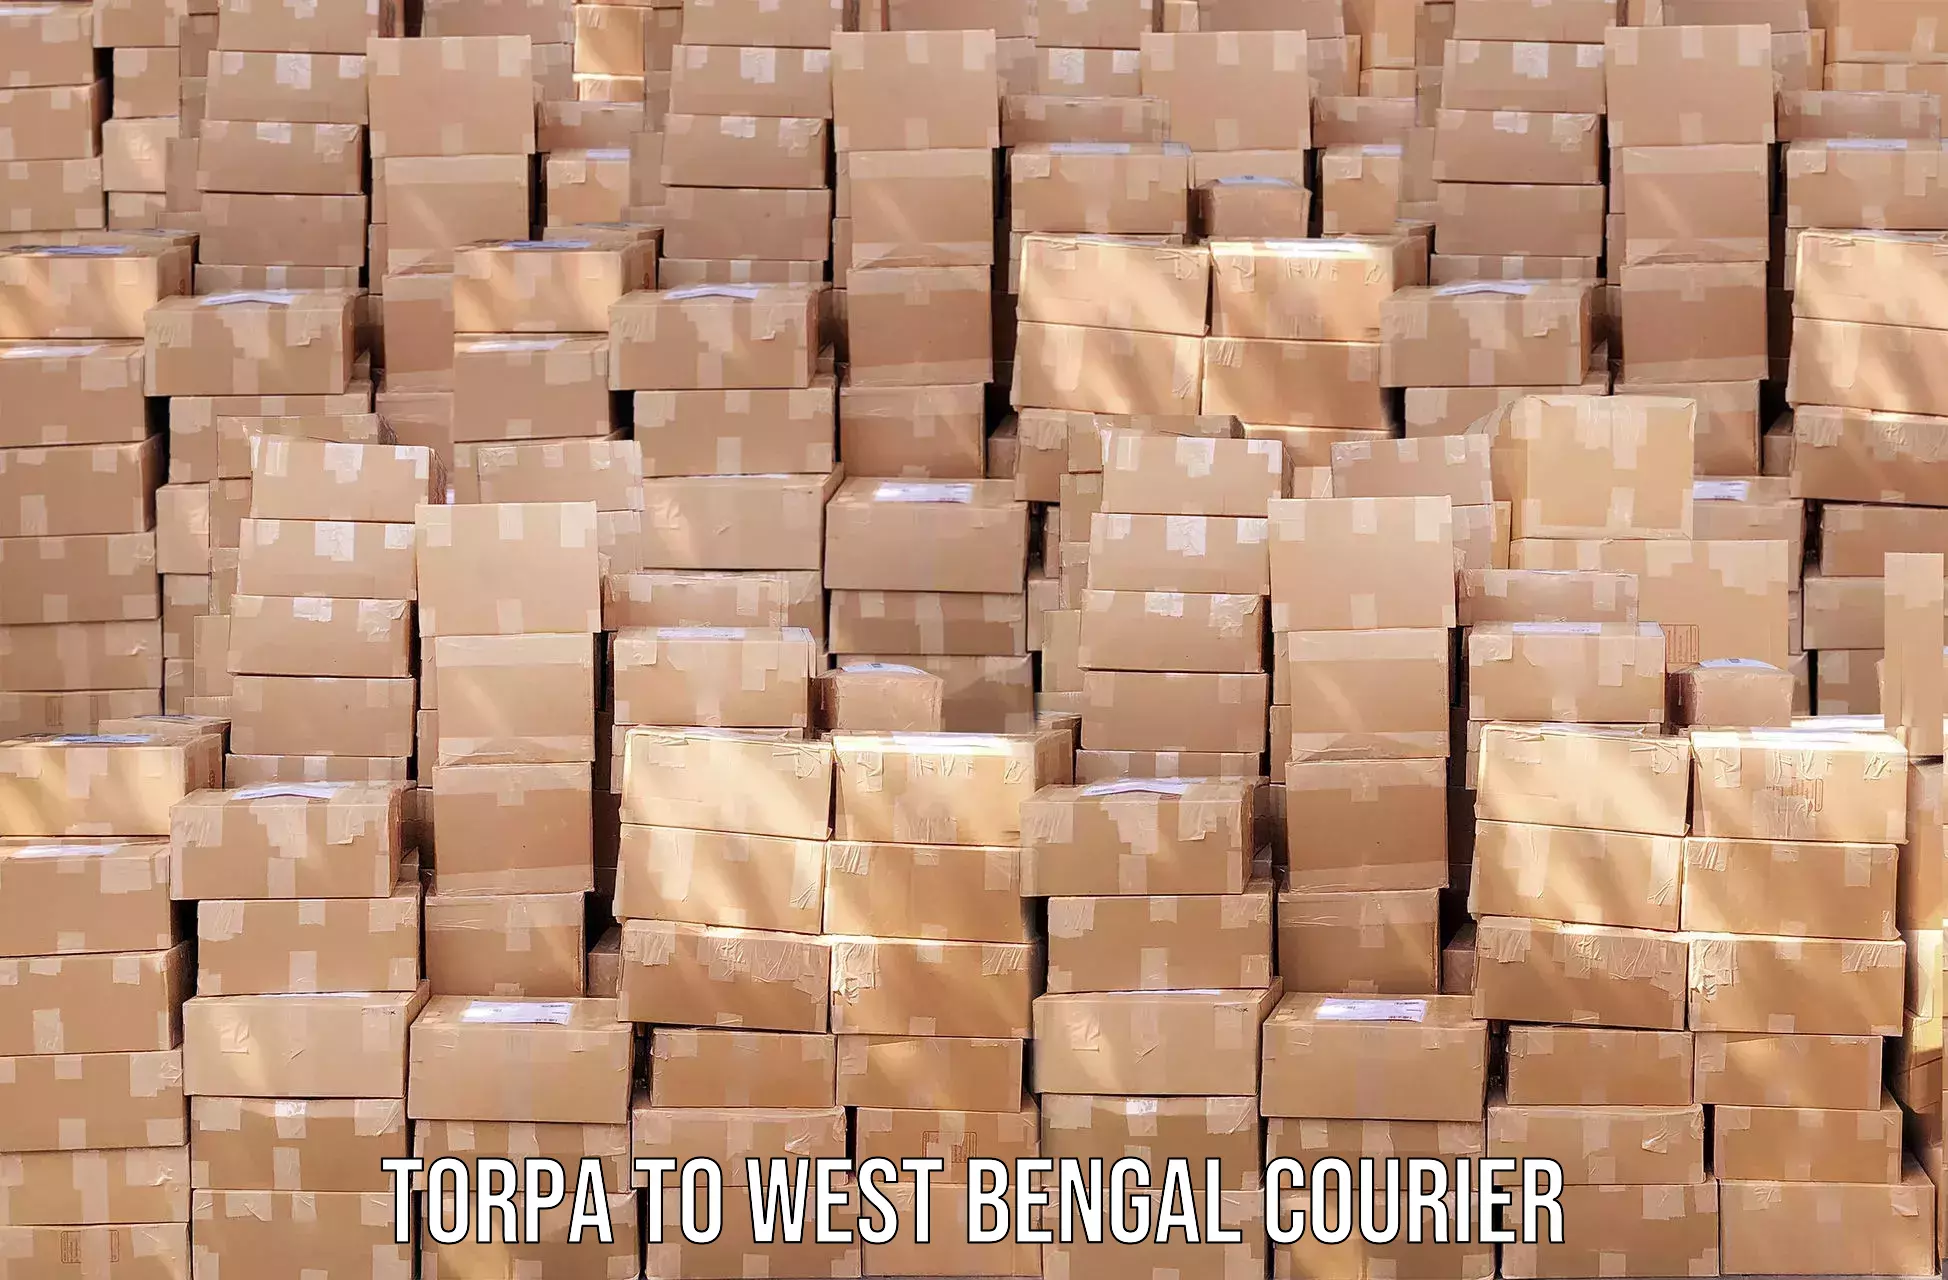 International courier networks Torpa to Budge Budge